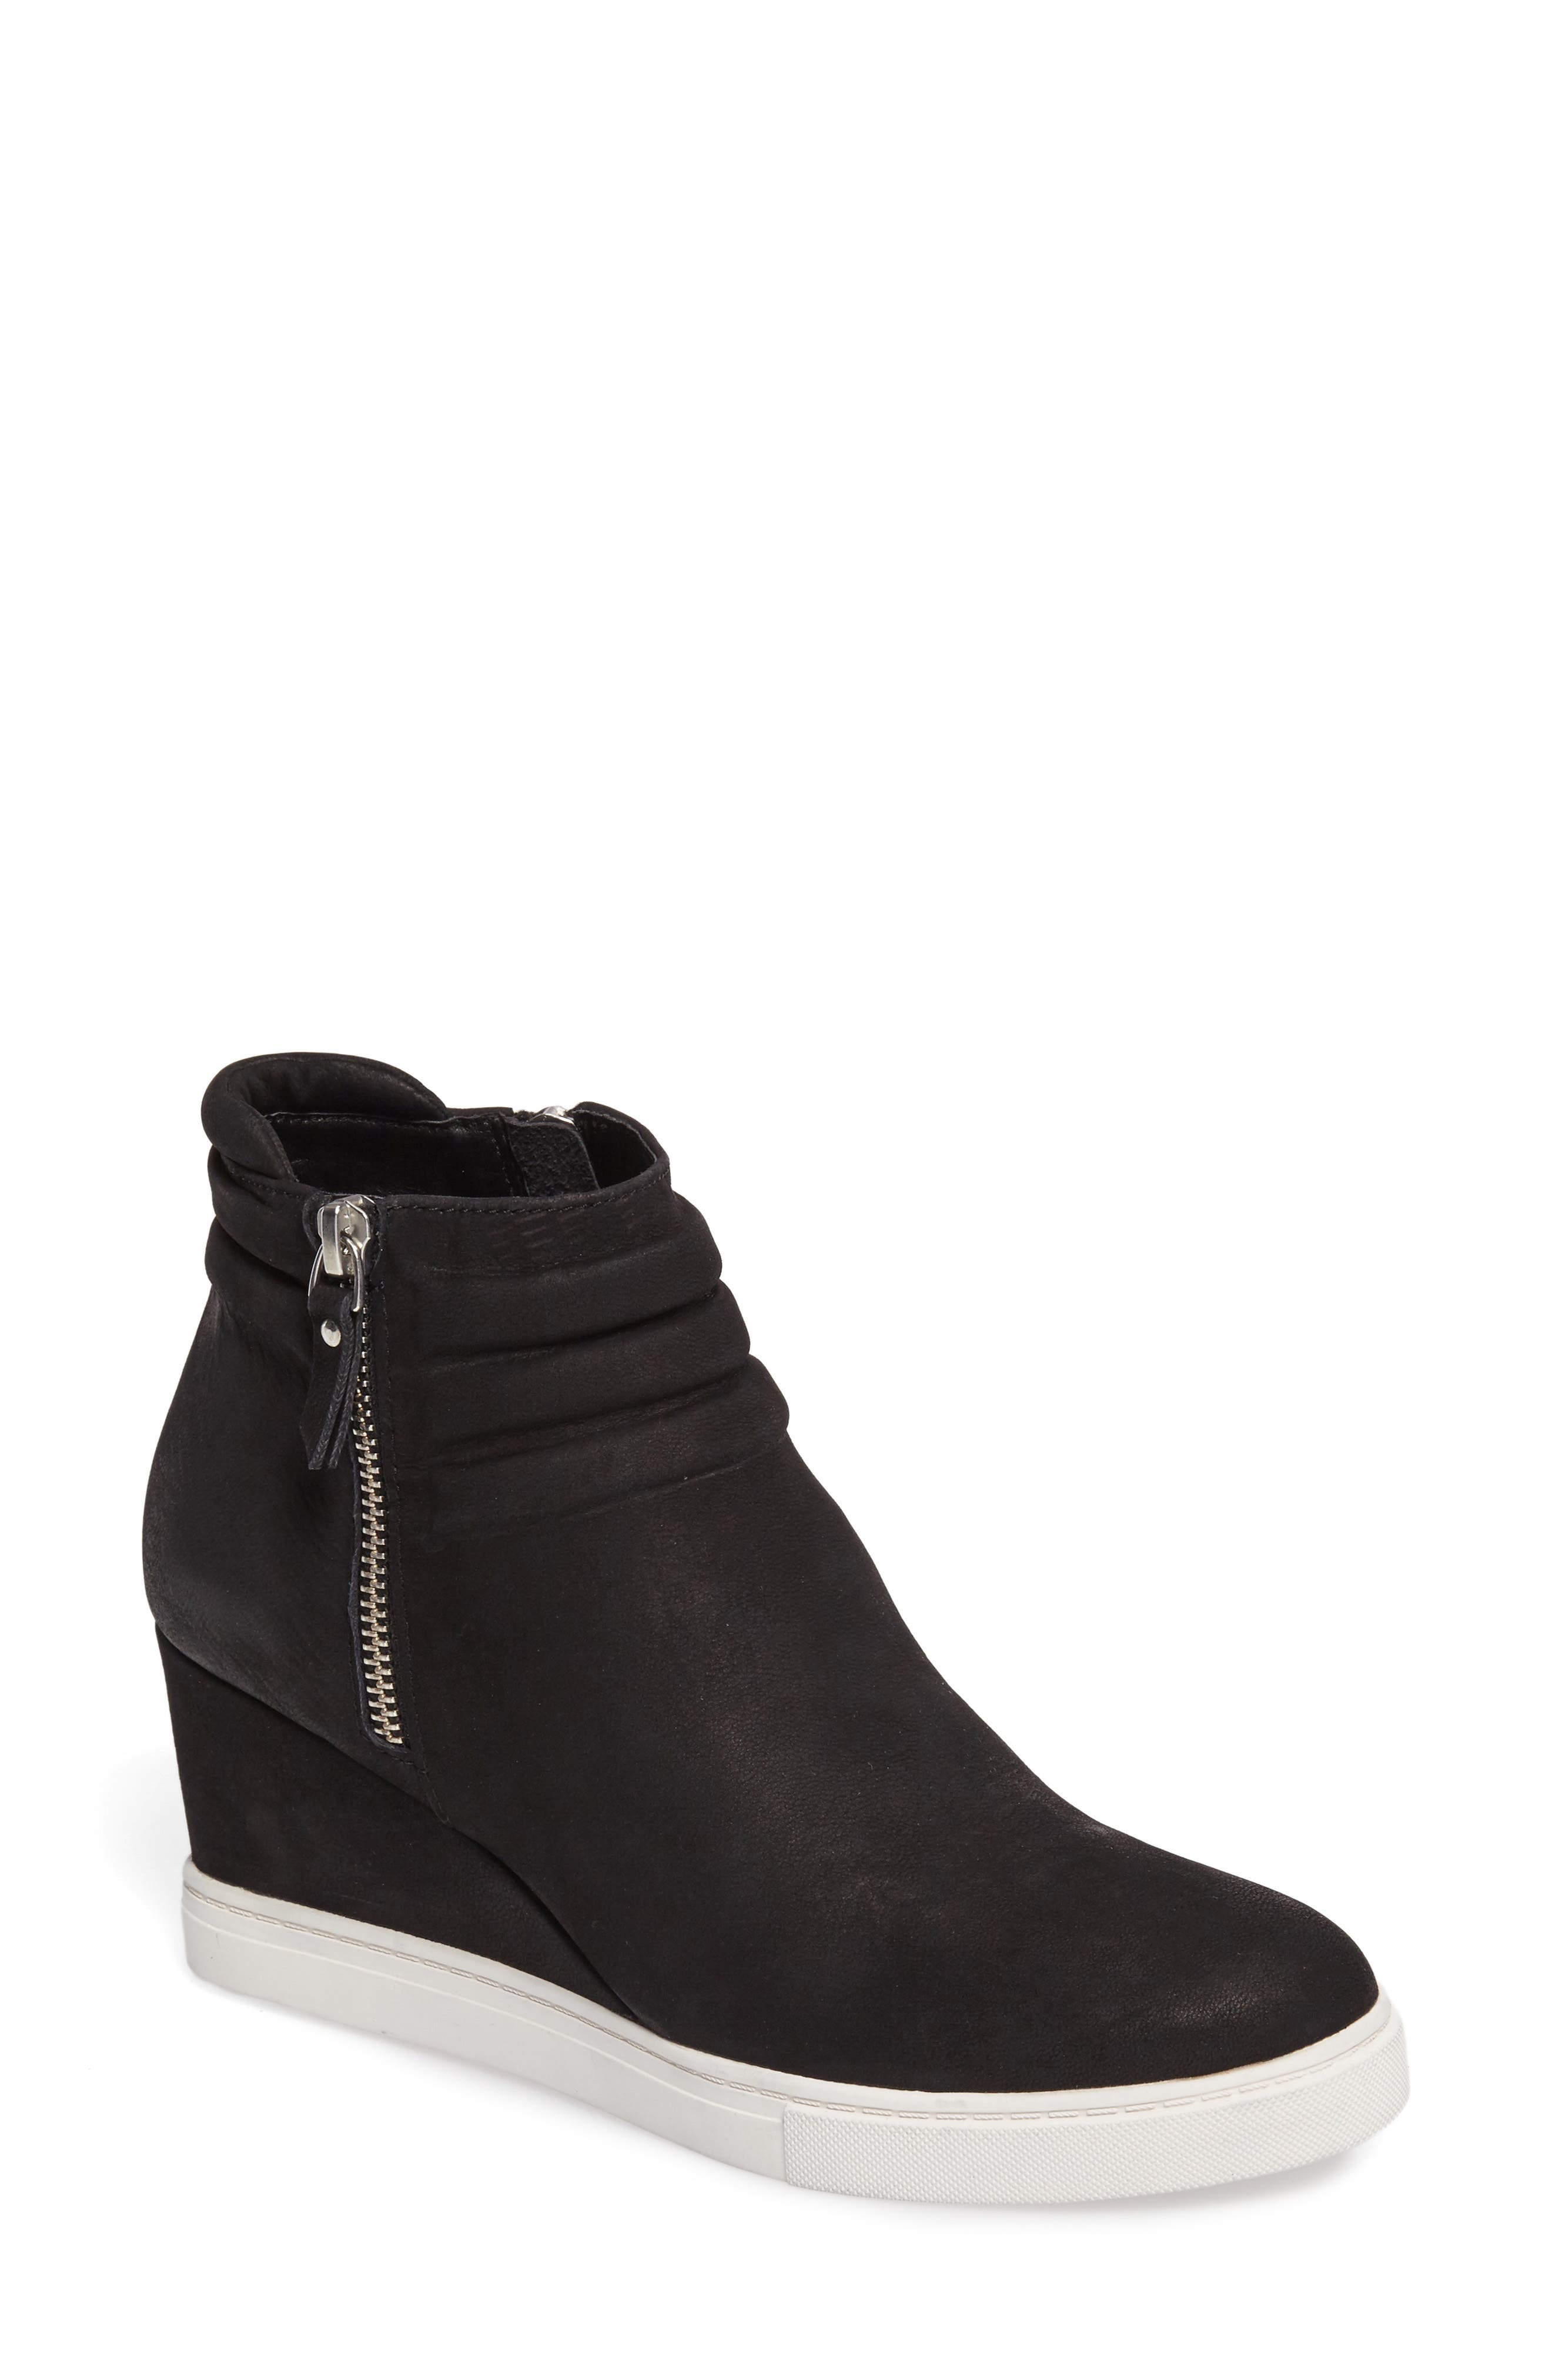 paolo wedge bootie